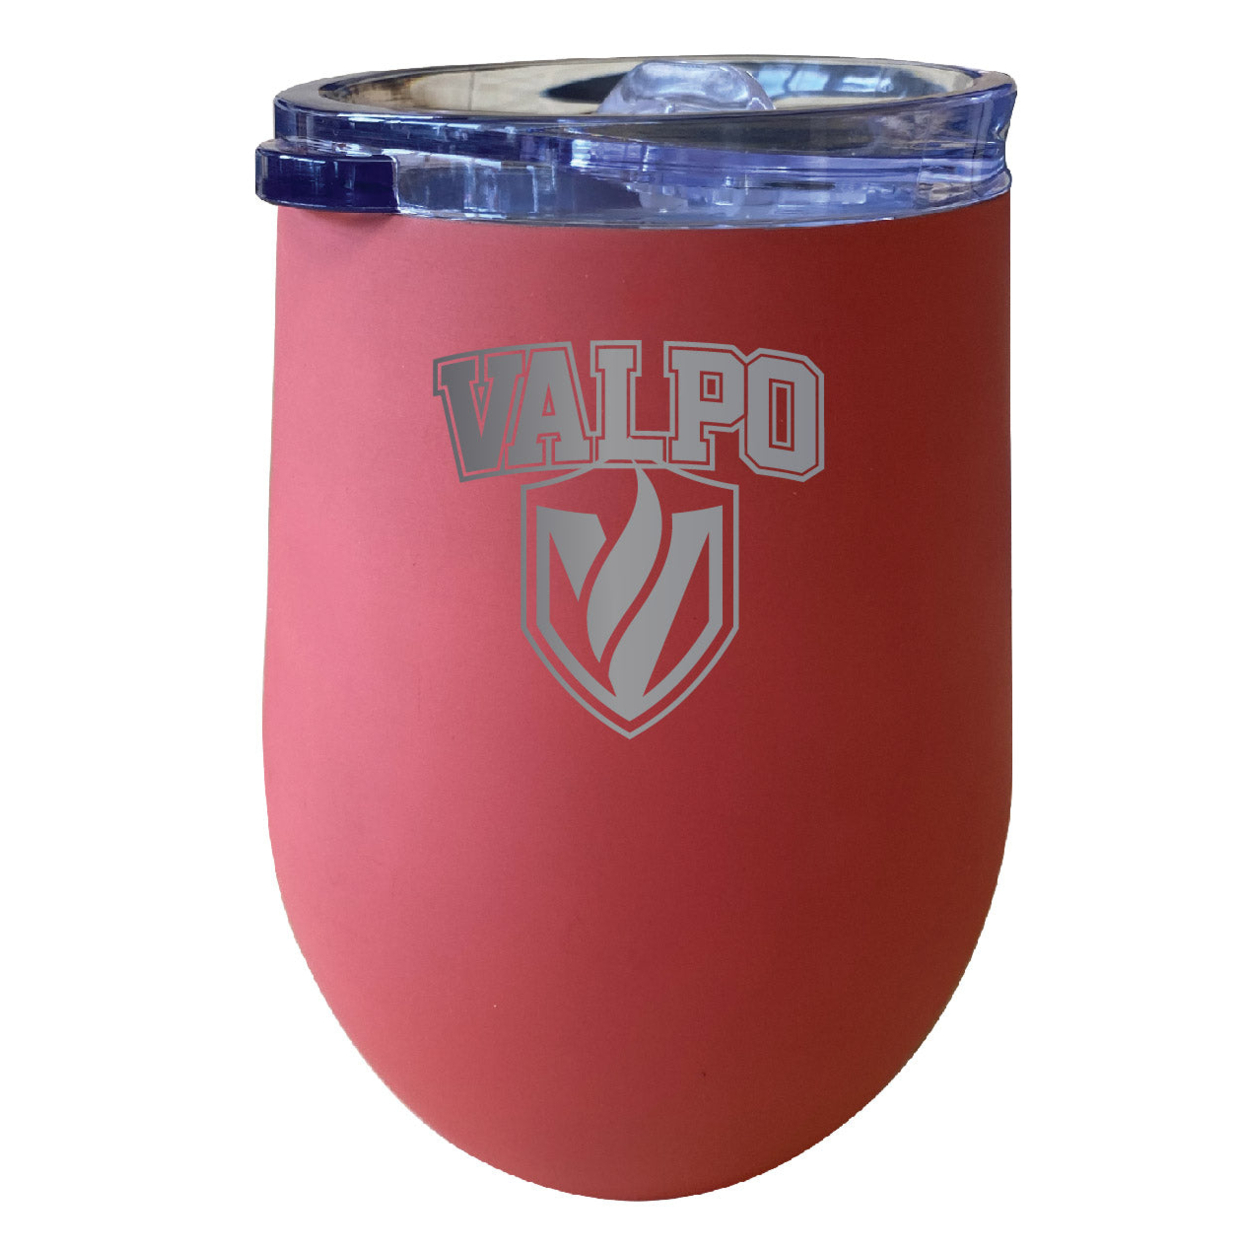 Valparaiso University 12 Oz Etched Insulated Wine Stainless Steel Tumbler - Choose Your Color - Seafoam